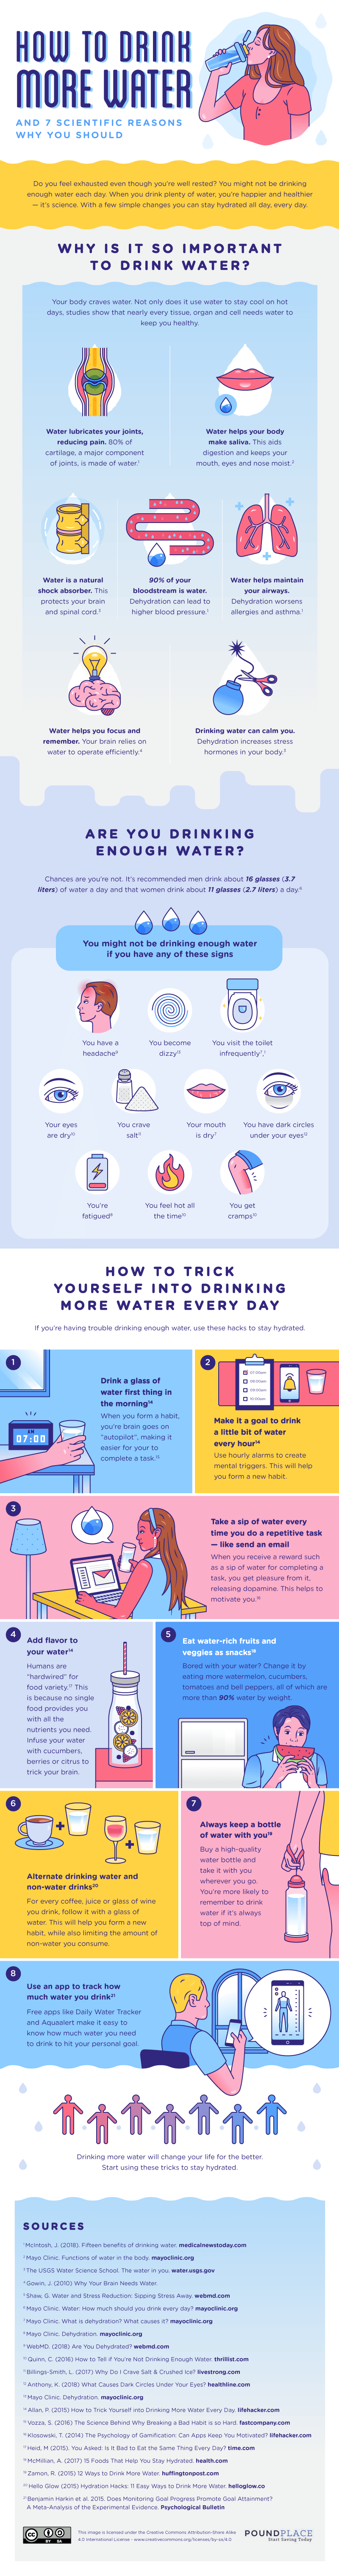 drink water productivity hack infographic